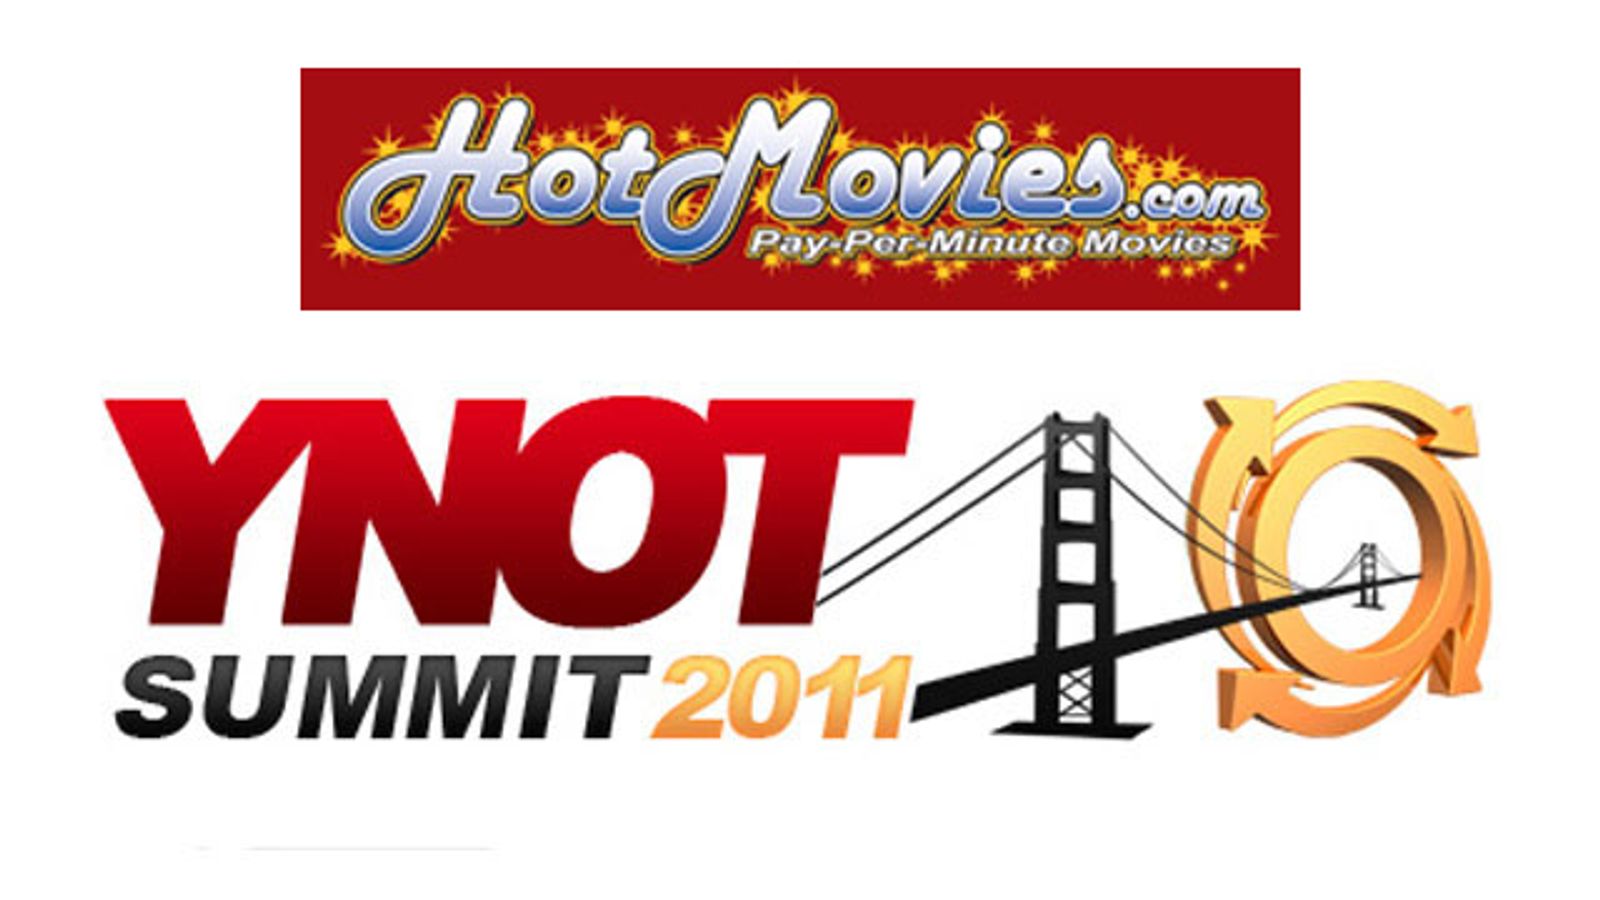 HotMovies Signs On As Gold Sponsor for YNOT Summit 2011